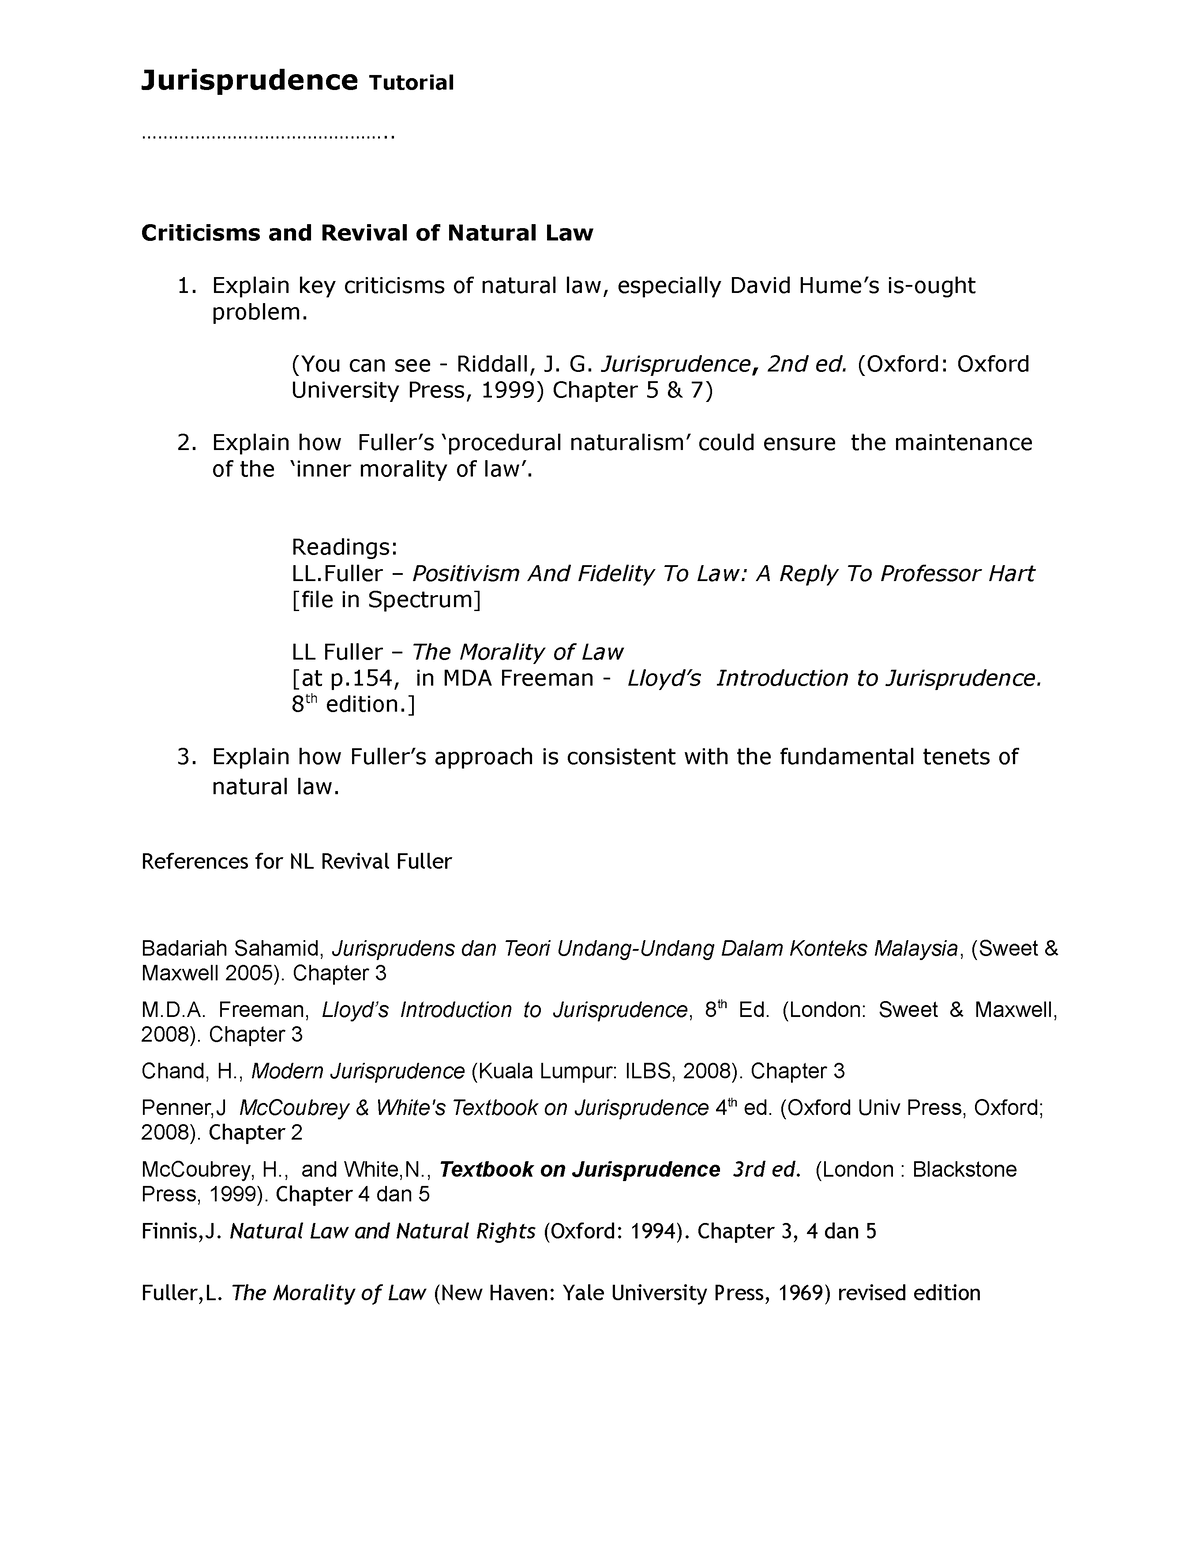 dissertation on natural law